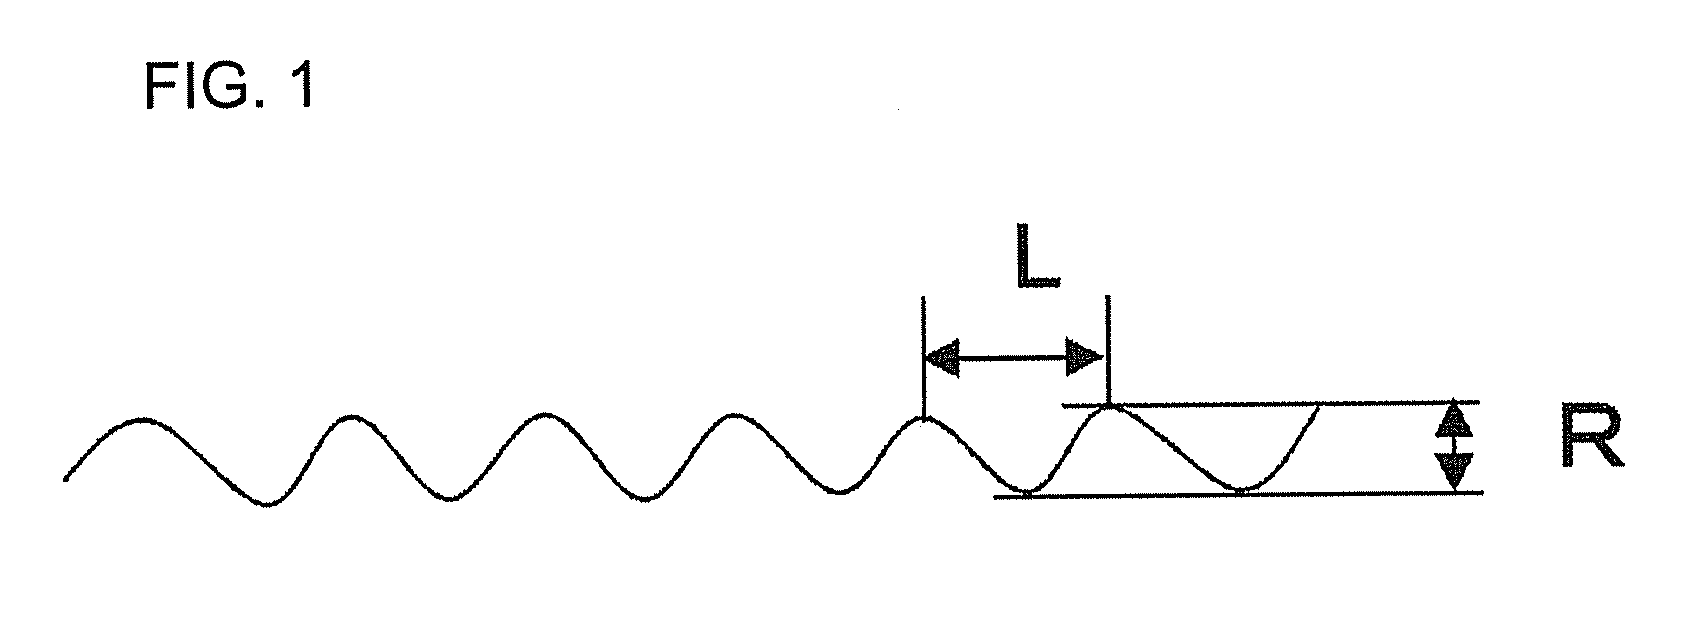 Artificial hair fiber, use thereof and process for producing the same